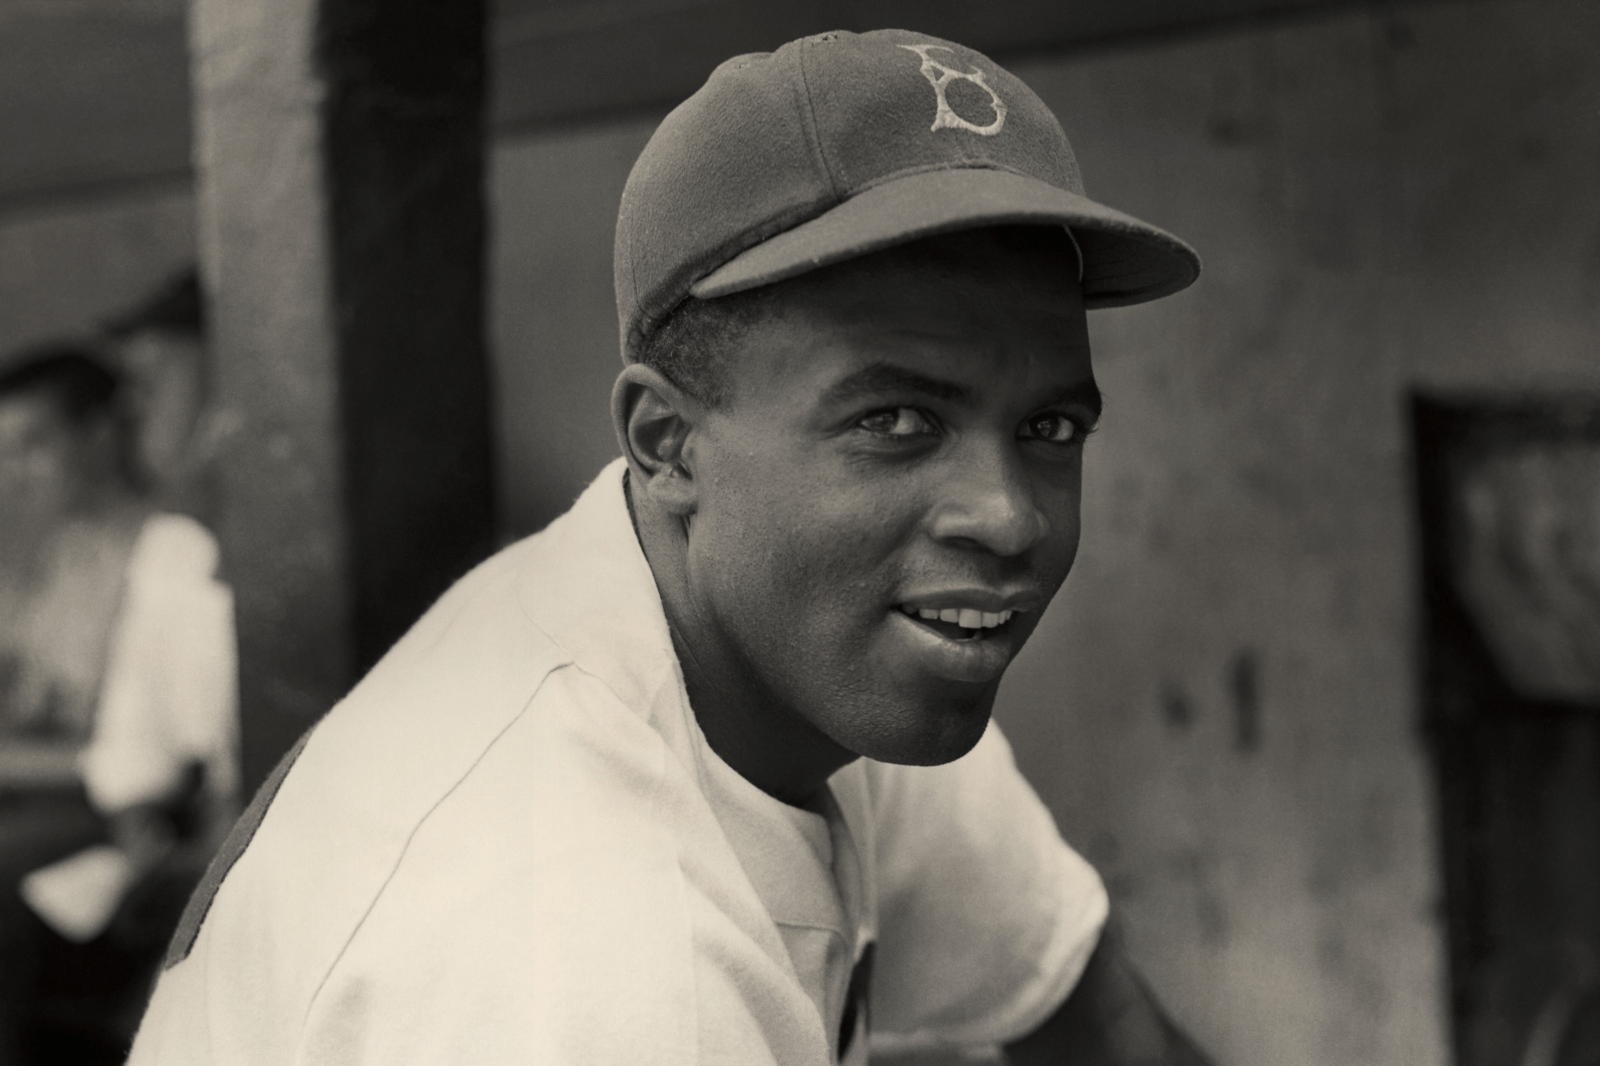 Jackie Robinson made his mark in the Minor Leagues